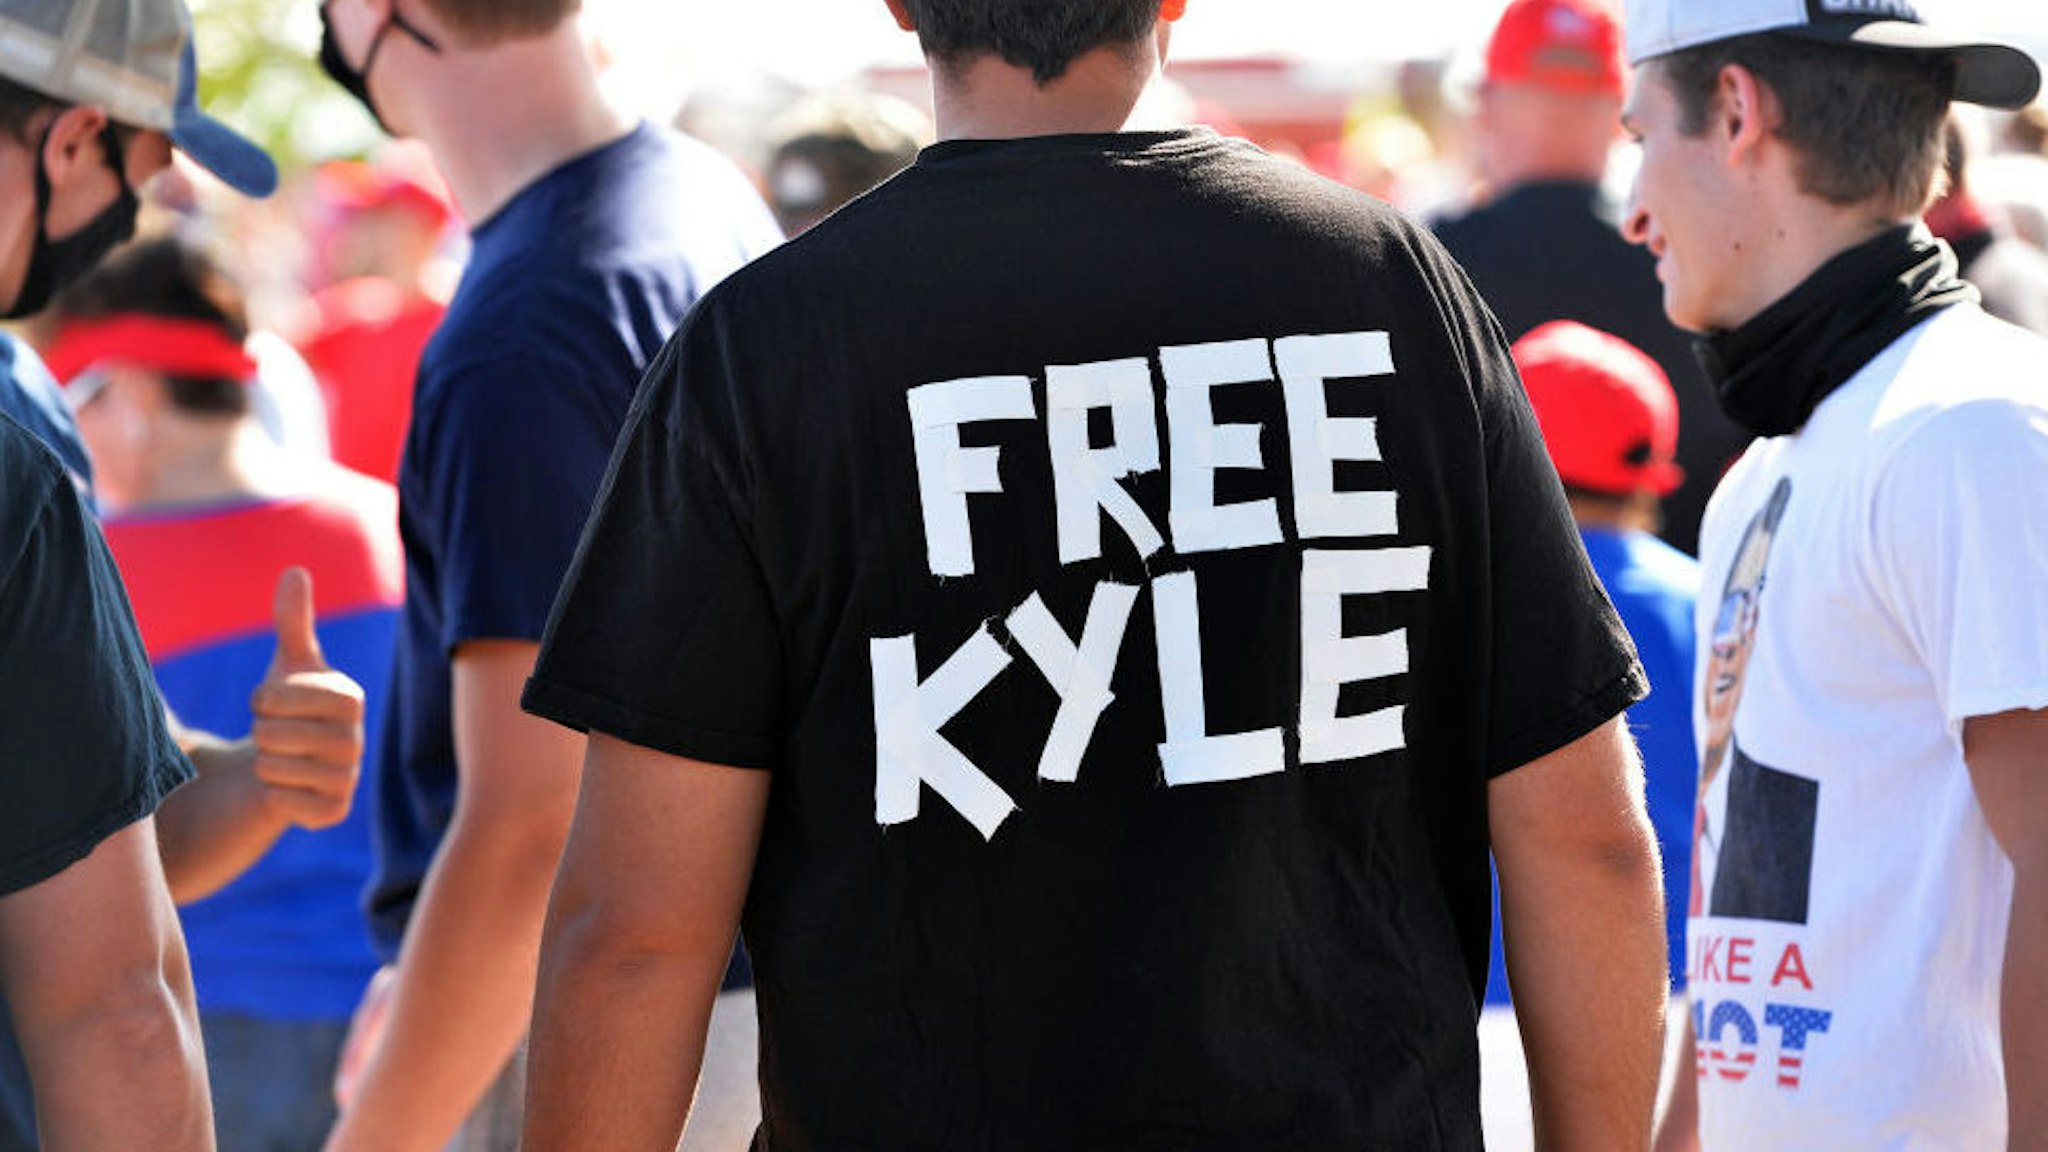 A man wears a shirt calling for freedom for Kyle Rittenhouse, 17, the man who allegedly shot protesters in Wisconsin, during a US President Donald Trump Campaign Rally, the day after the end of the Republican National Convention, at Manchester airport in Londonderry, New Hampshire on August 28, 2020.